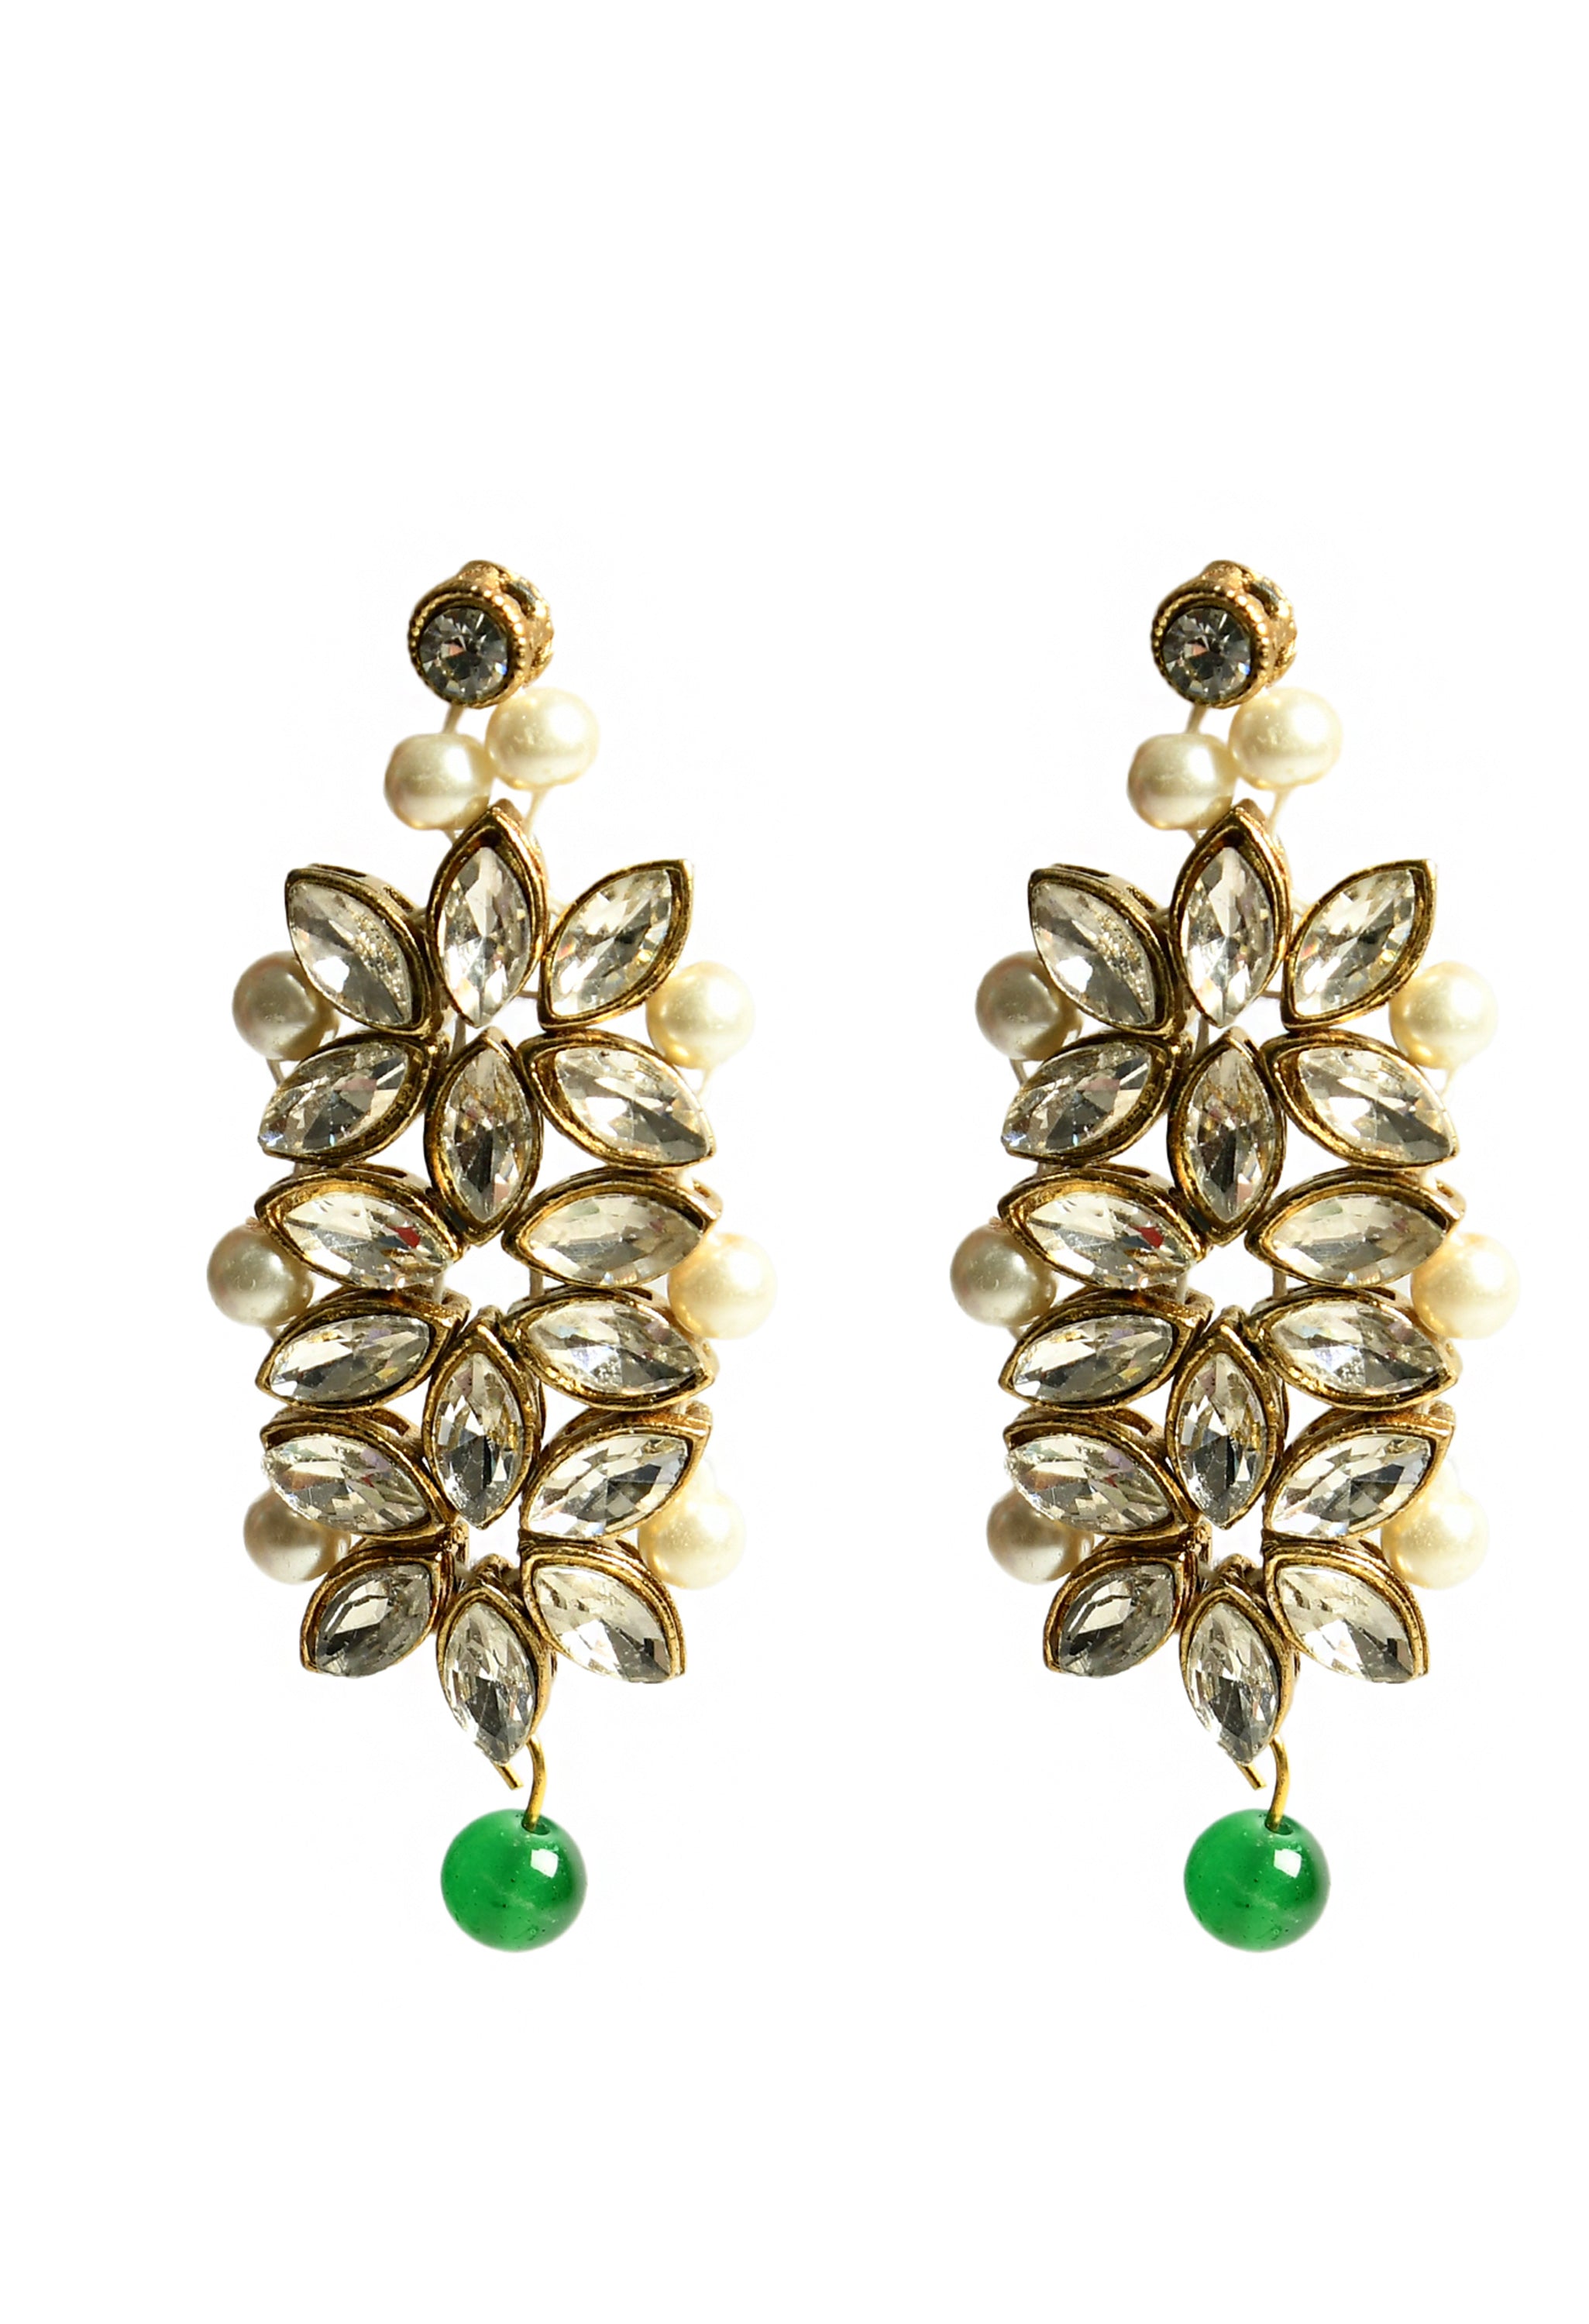 Women's Green And White Pearl And Kundan Necklaceset With Earrings And Tika - Tehzeeb